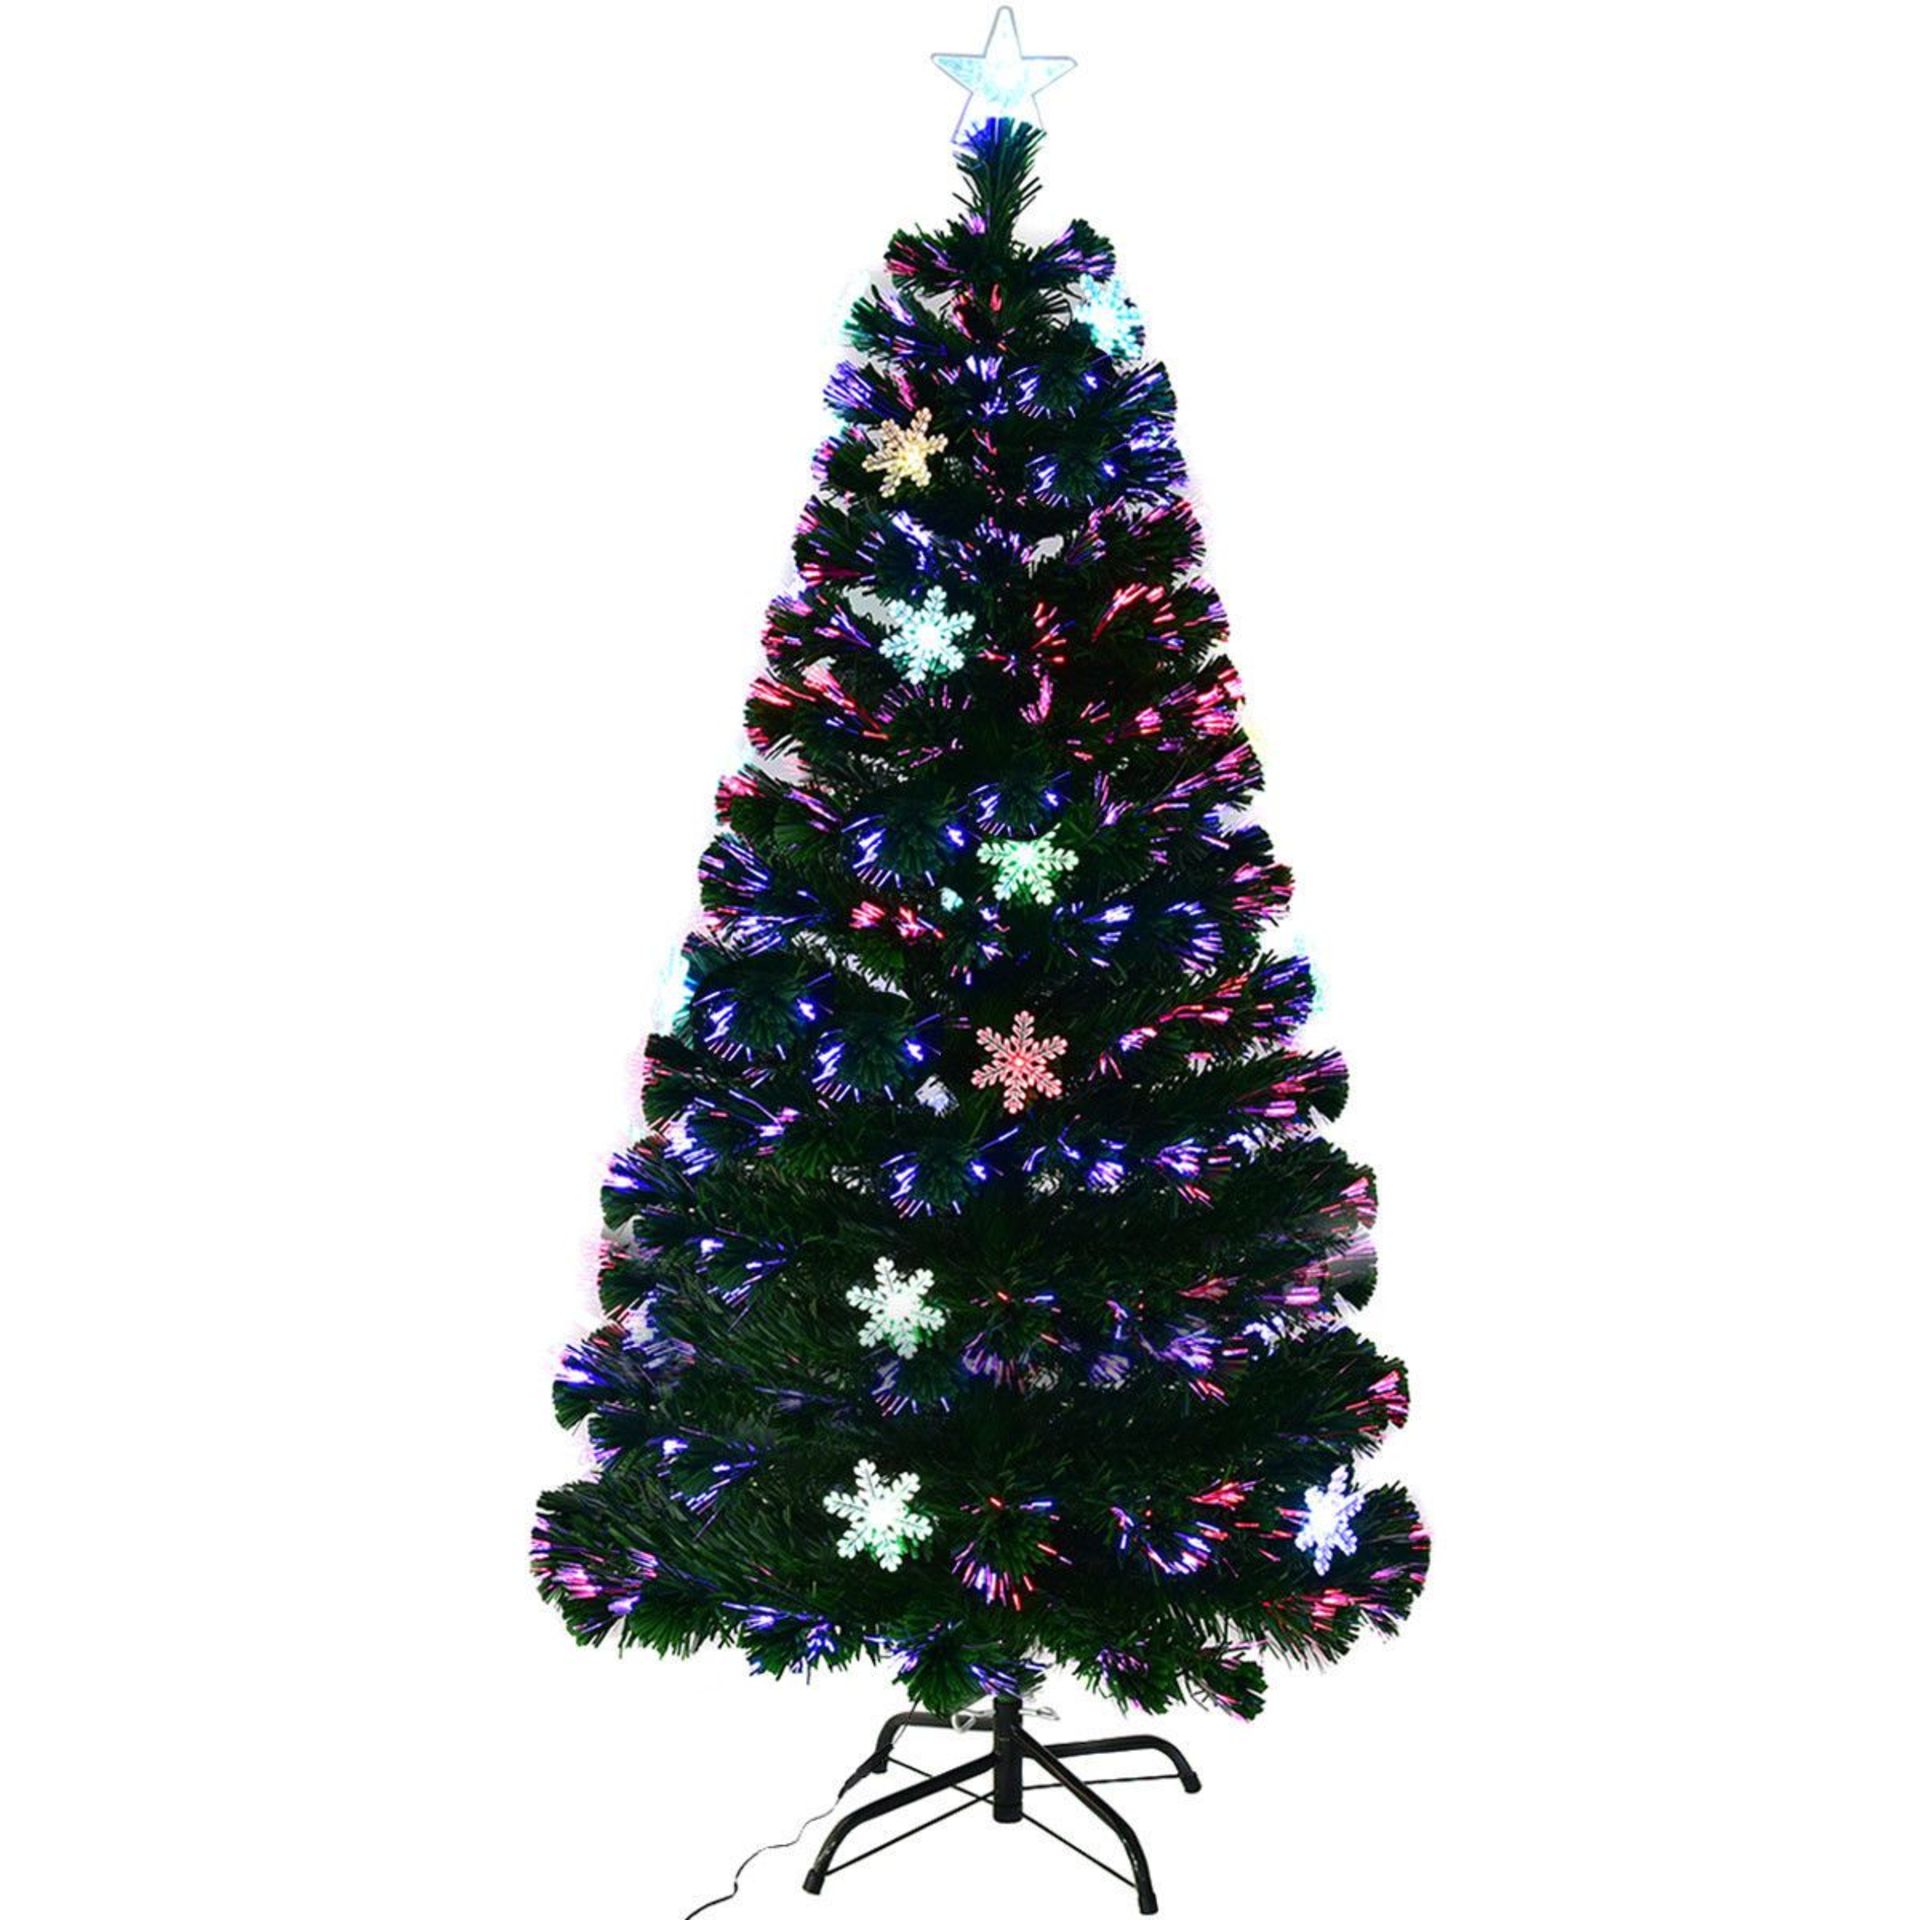 7ft / 2.1m Fibre Optic Christmas Tree with Snowflake and Star Decoration. - R13.12.